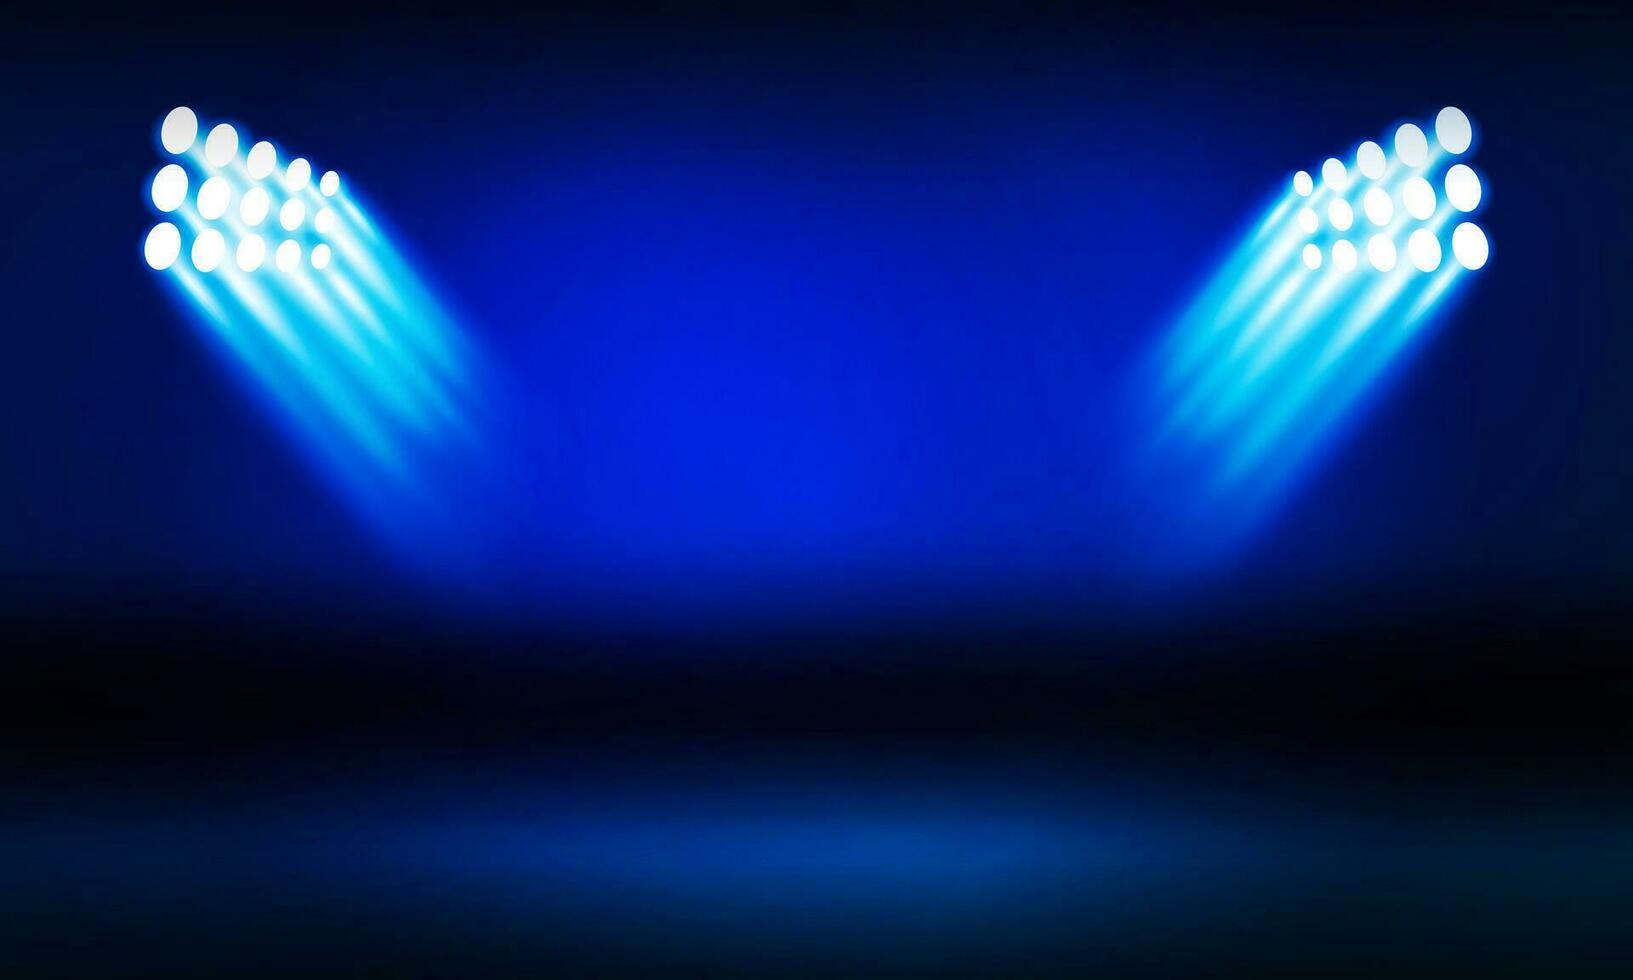 Abstract show led light concert stage with blue beam two light illuminating empty space, panoramic on black background with banner stadium vector design.